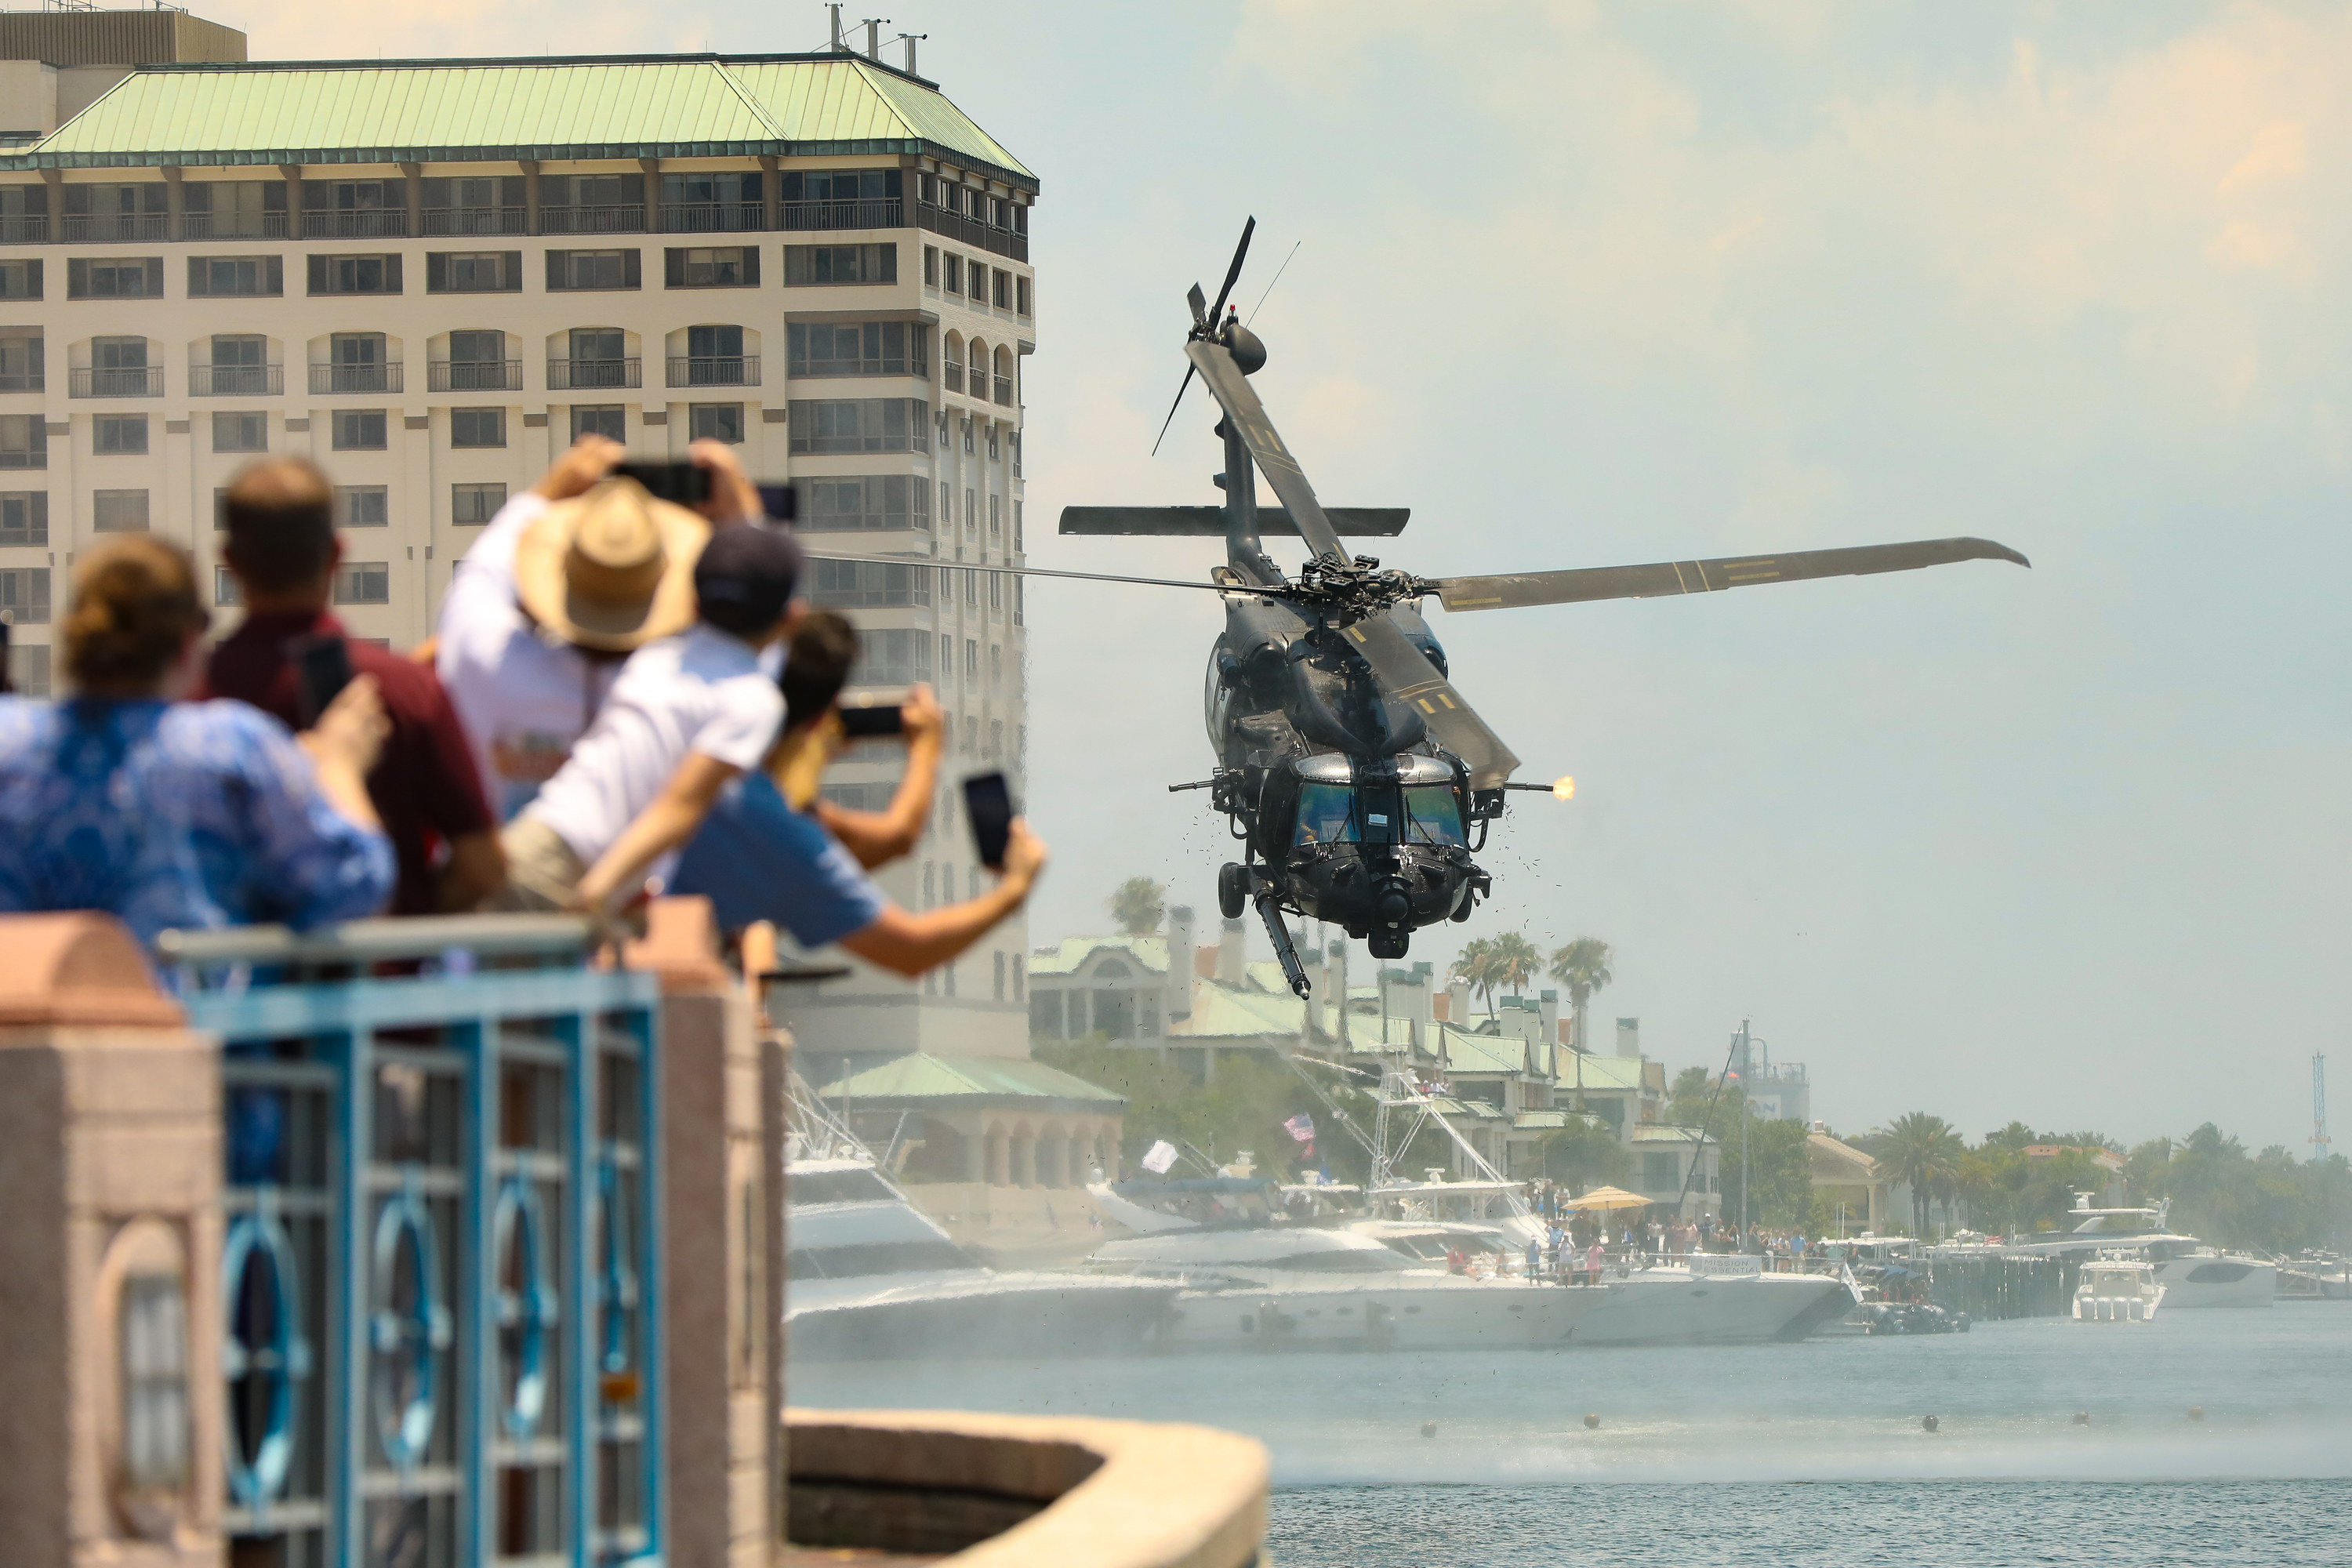 Onlookers watching a helicopter display